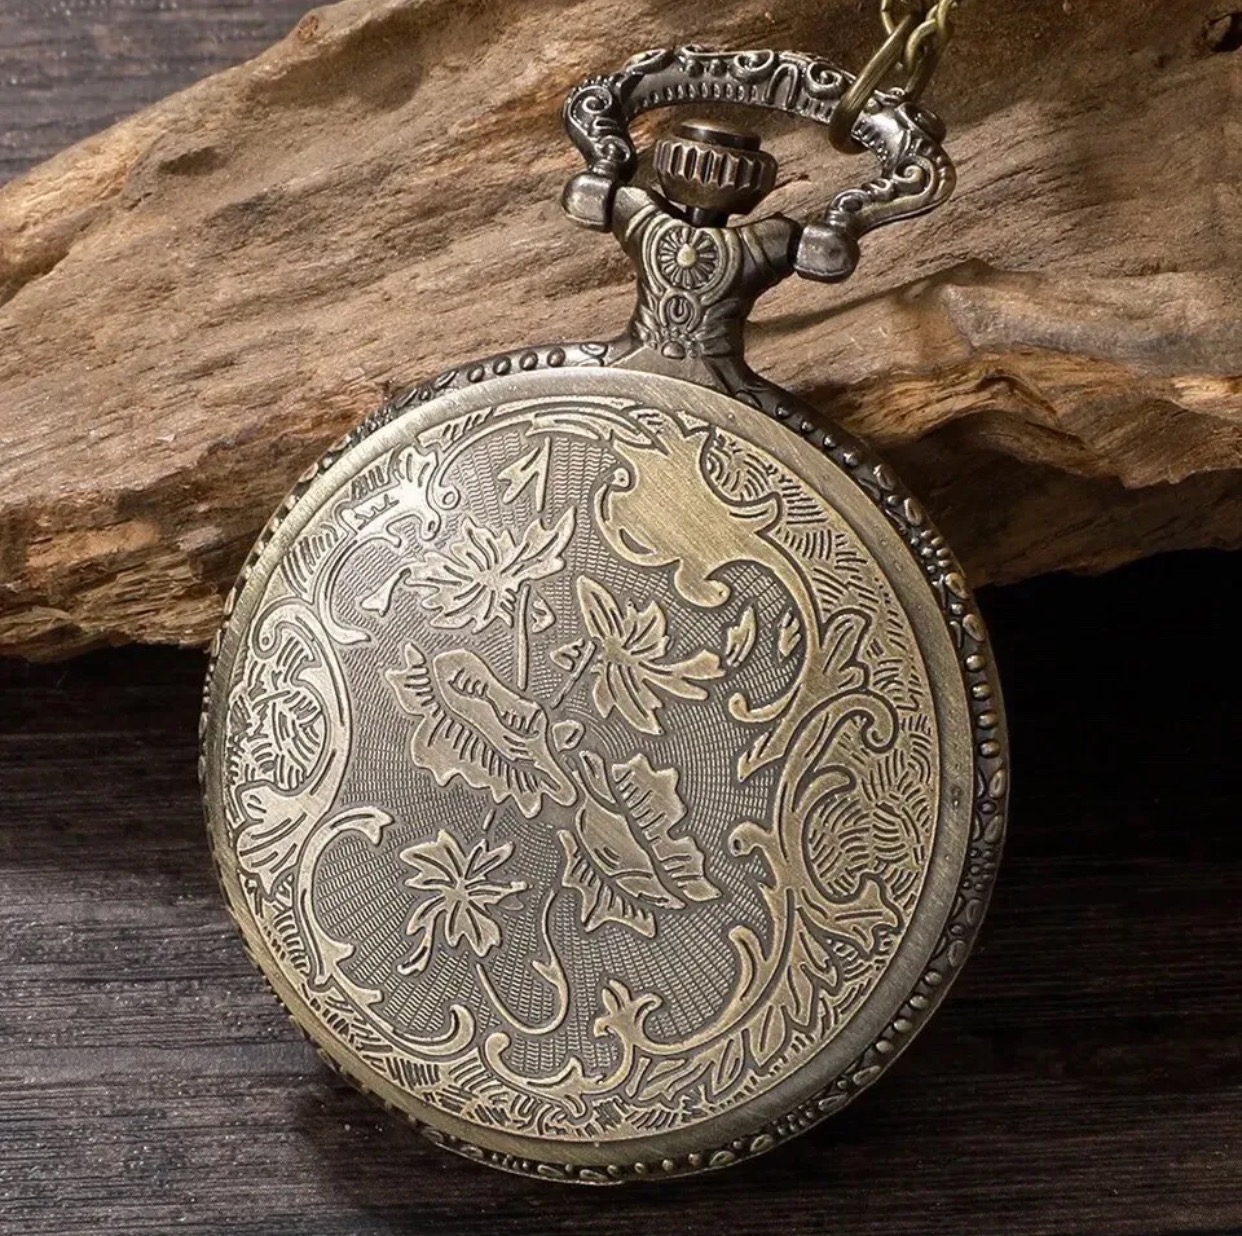 One Piece Pendant Watch Famous Anime Carved Pocket Watch Necklace